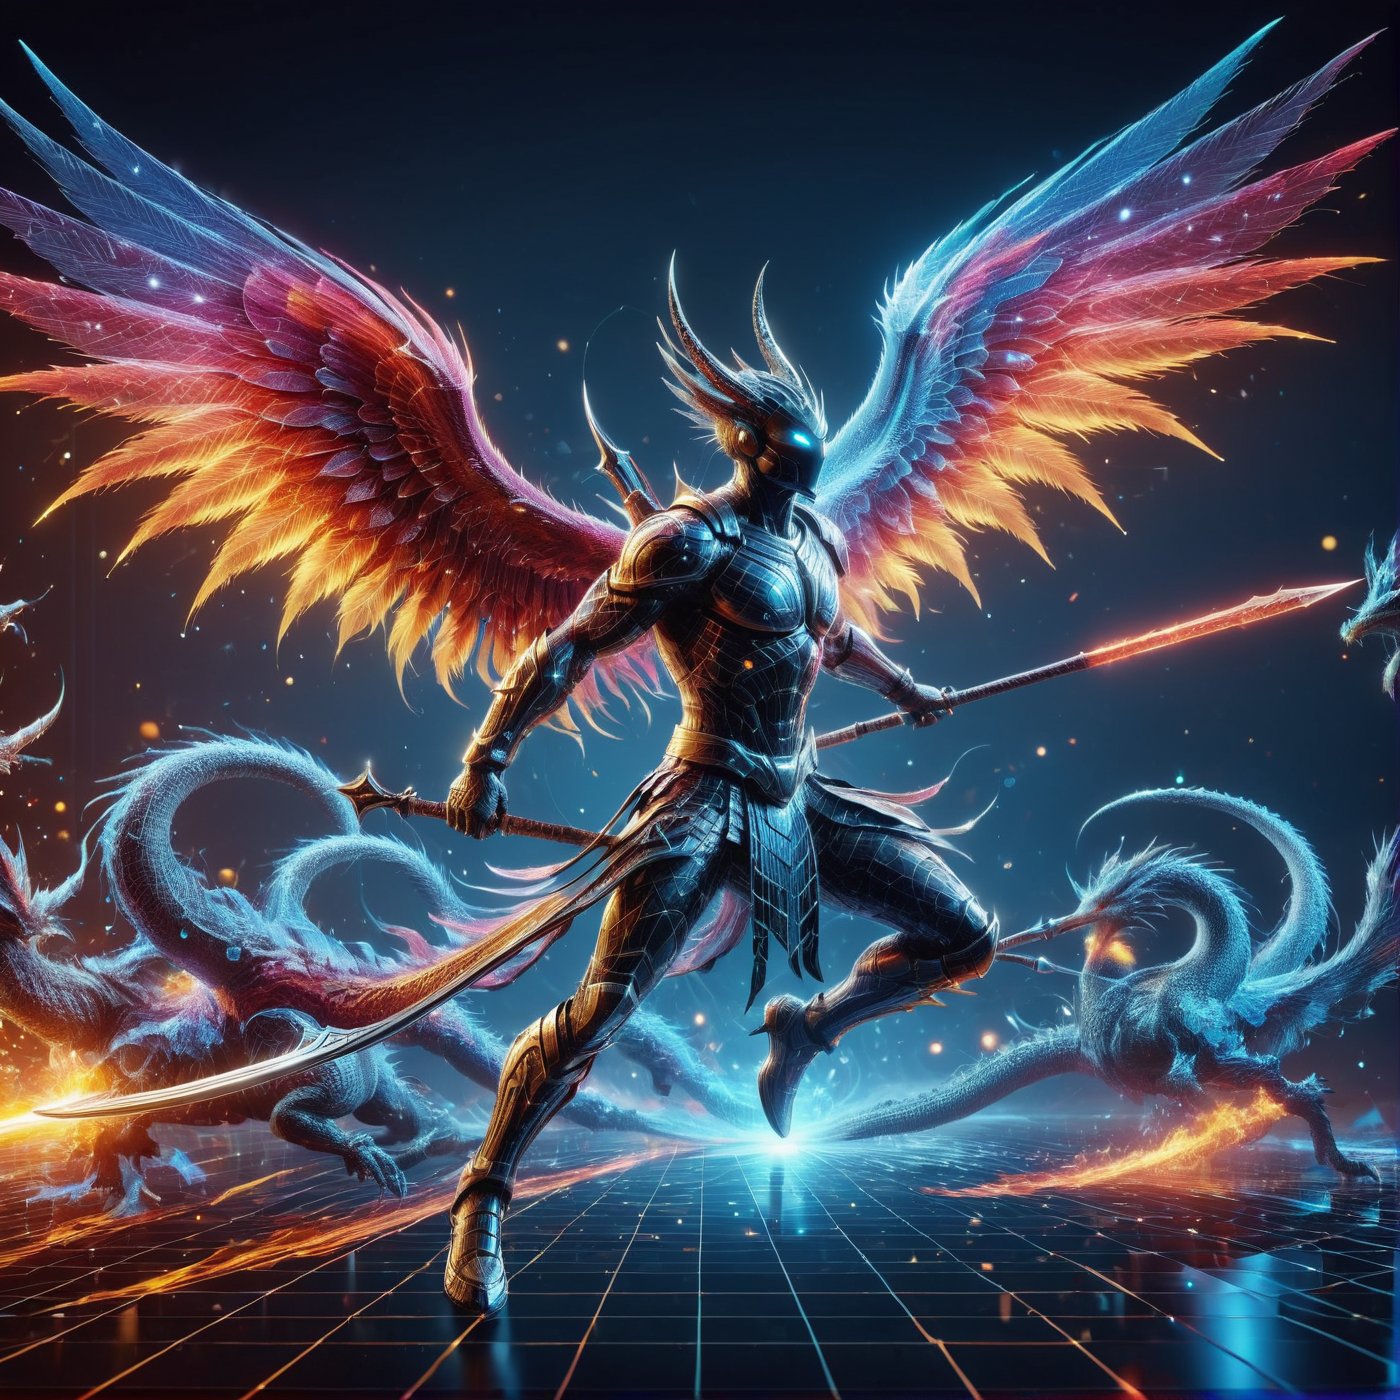 (((full_body shot))), solo, Photo hologram 3dmash of a warrior with a spear is battling a big dragon have pair of wings, action_pose, holomashdragon, ,3D Mesh, highly detailed, hyper realistic, with dramatic polarizing filter, vivid colors, sharp focus, HDR, UHD, 64K, 16mm, color graded portra 400 film, remarkable color, ultra realistic,